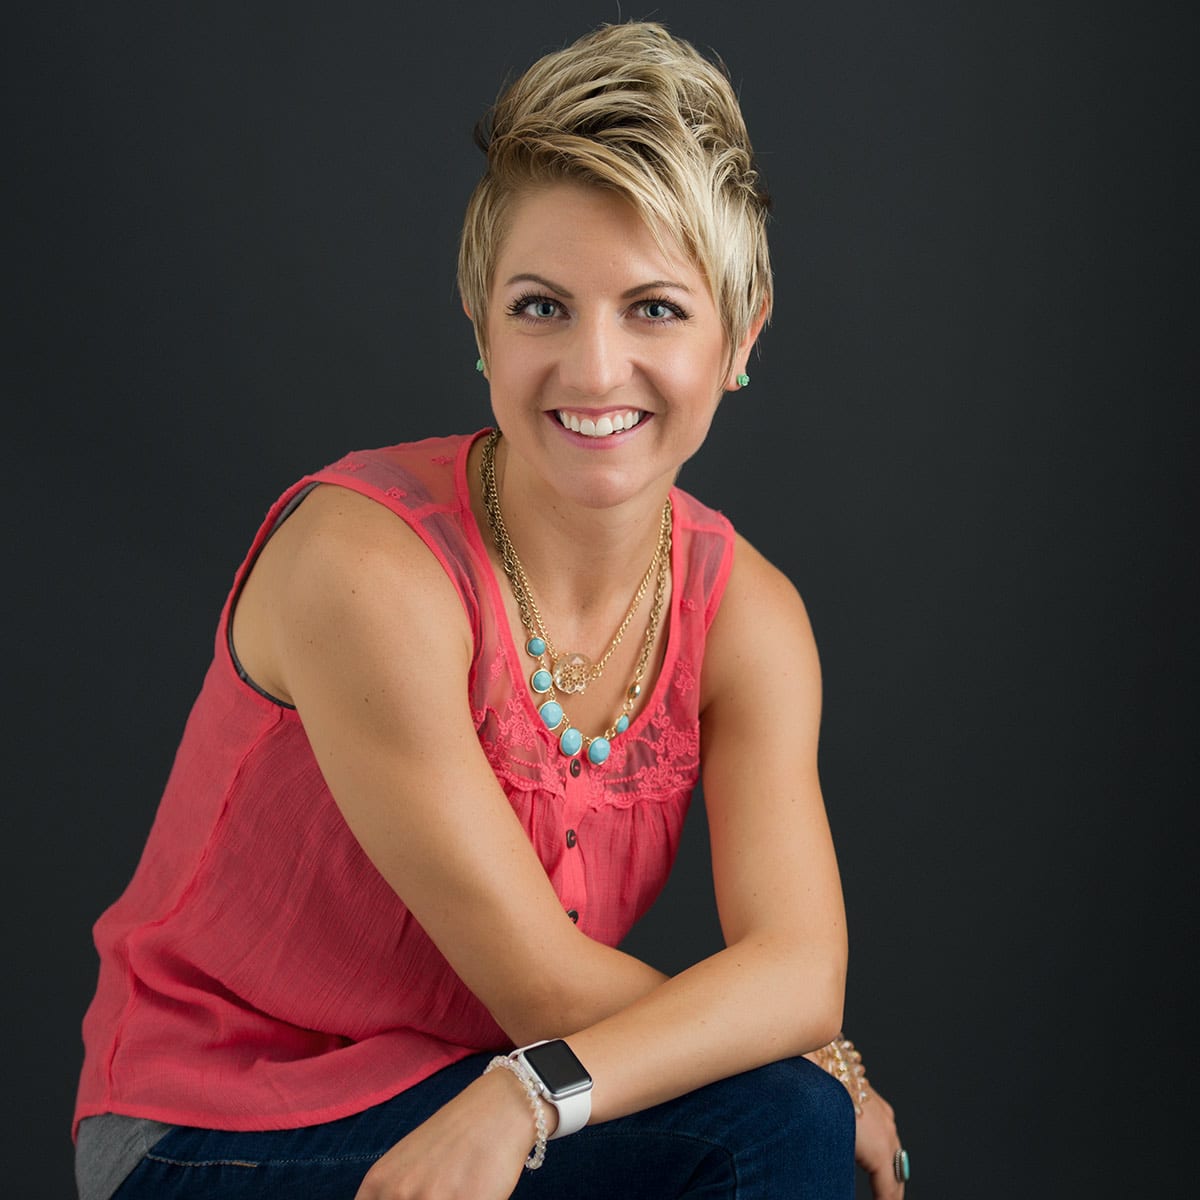 Little Black Book: Women in Business St. Charles County. EichPhoto - Wentzville Professional Business Headshots. Powerful women in the community helping each other succeed and prosper. Rachel Moretti - DOterra essential oil consultant